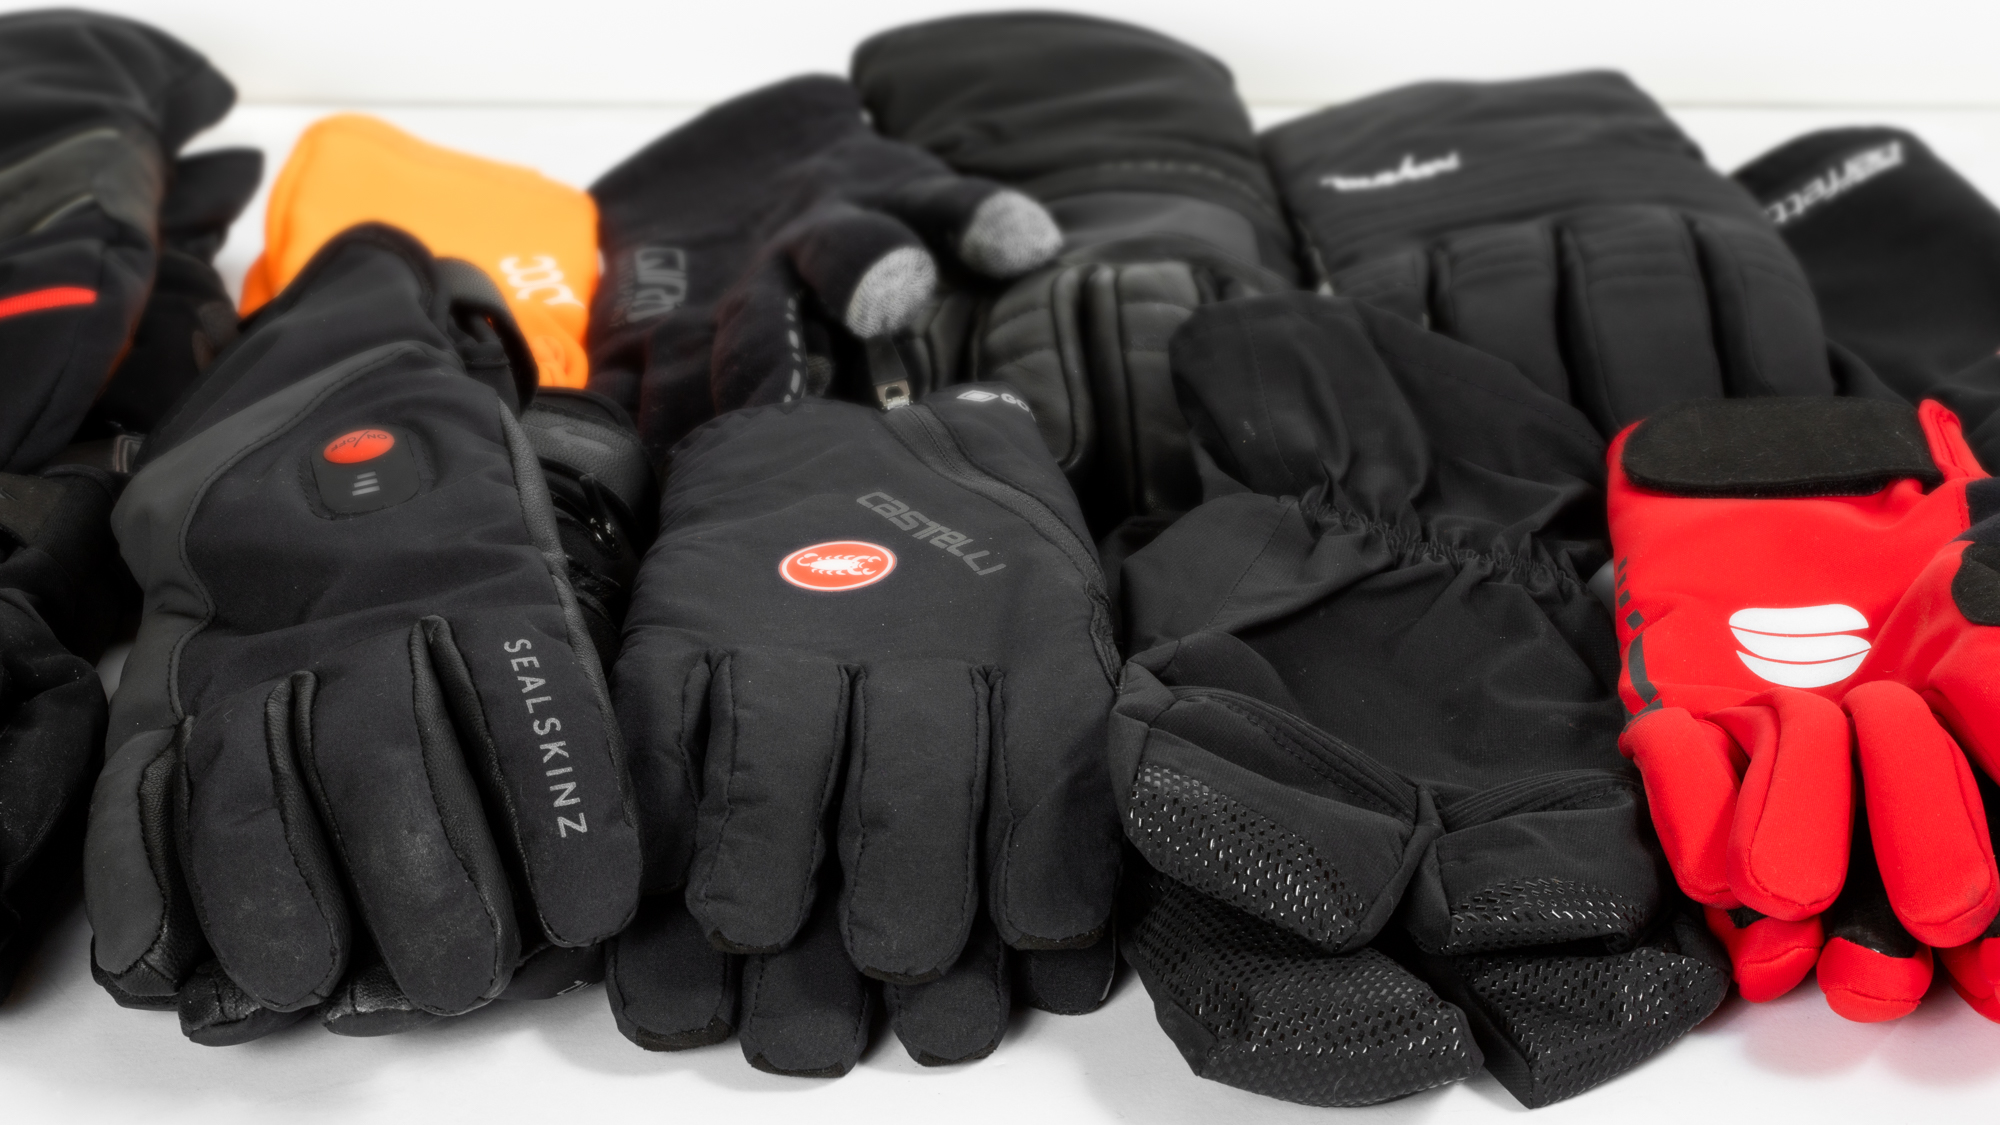 Thermal gloves: Warmest glove system for the winter